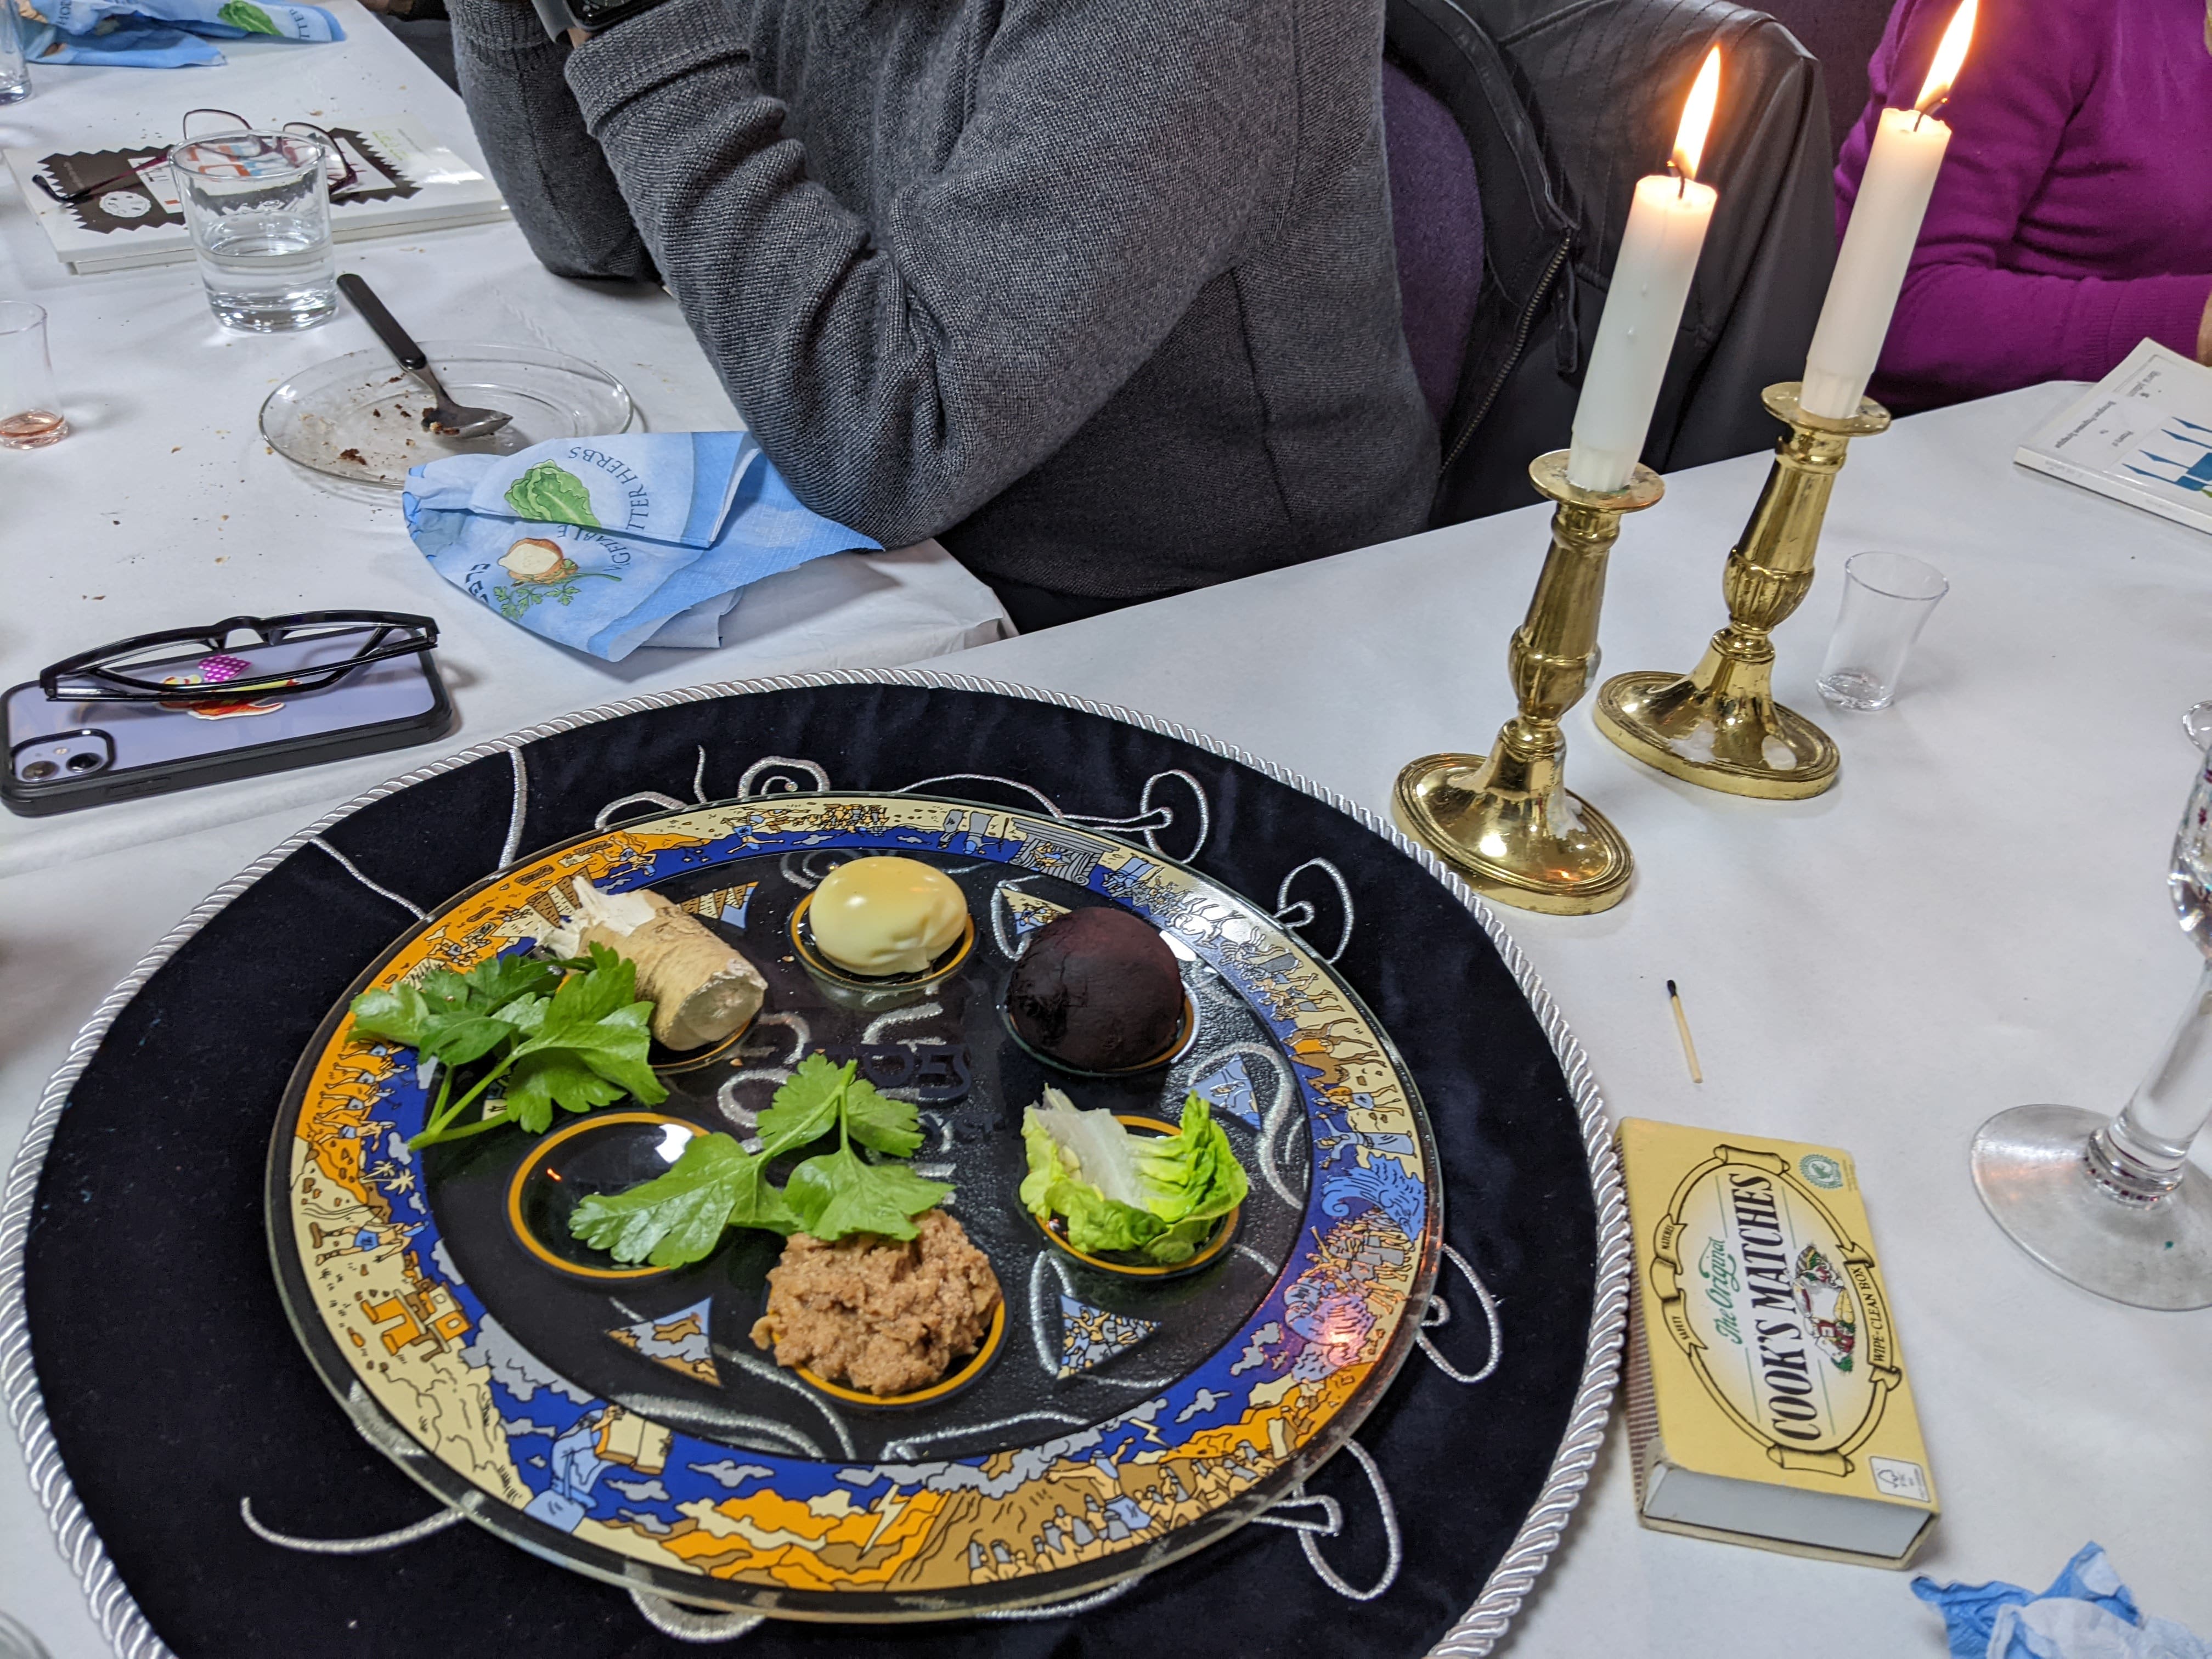 Candles beside the traditional seder plate...